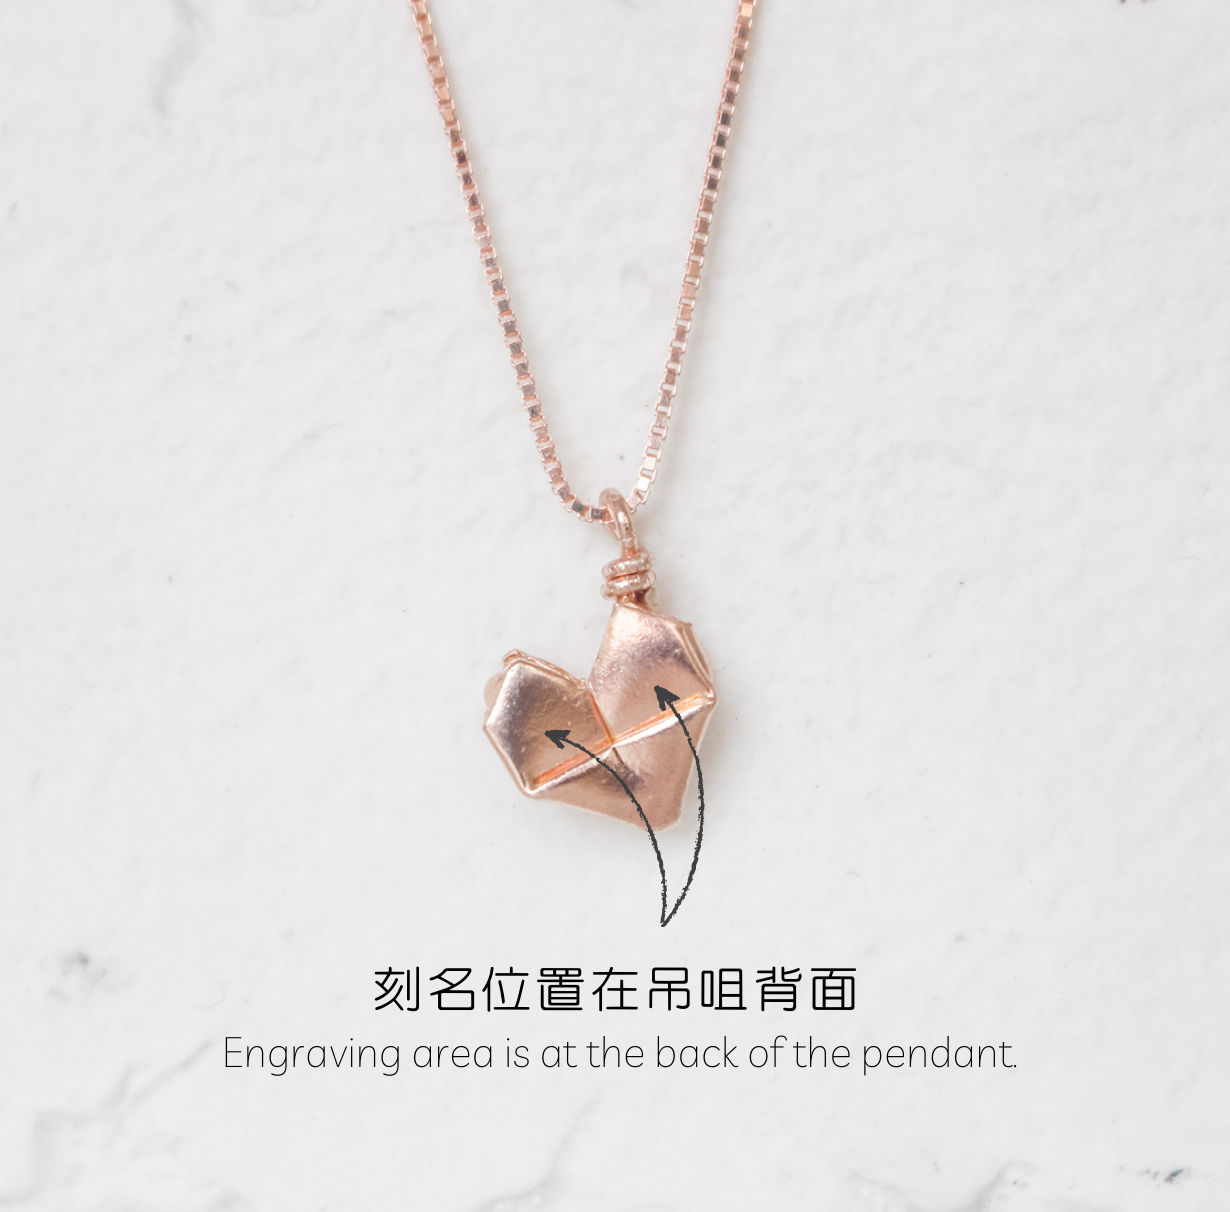 Rose Gold Plated Silver Origami Mini Heart Necklace (8mm)